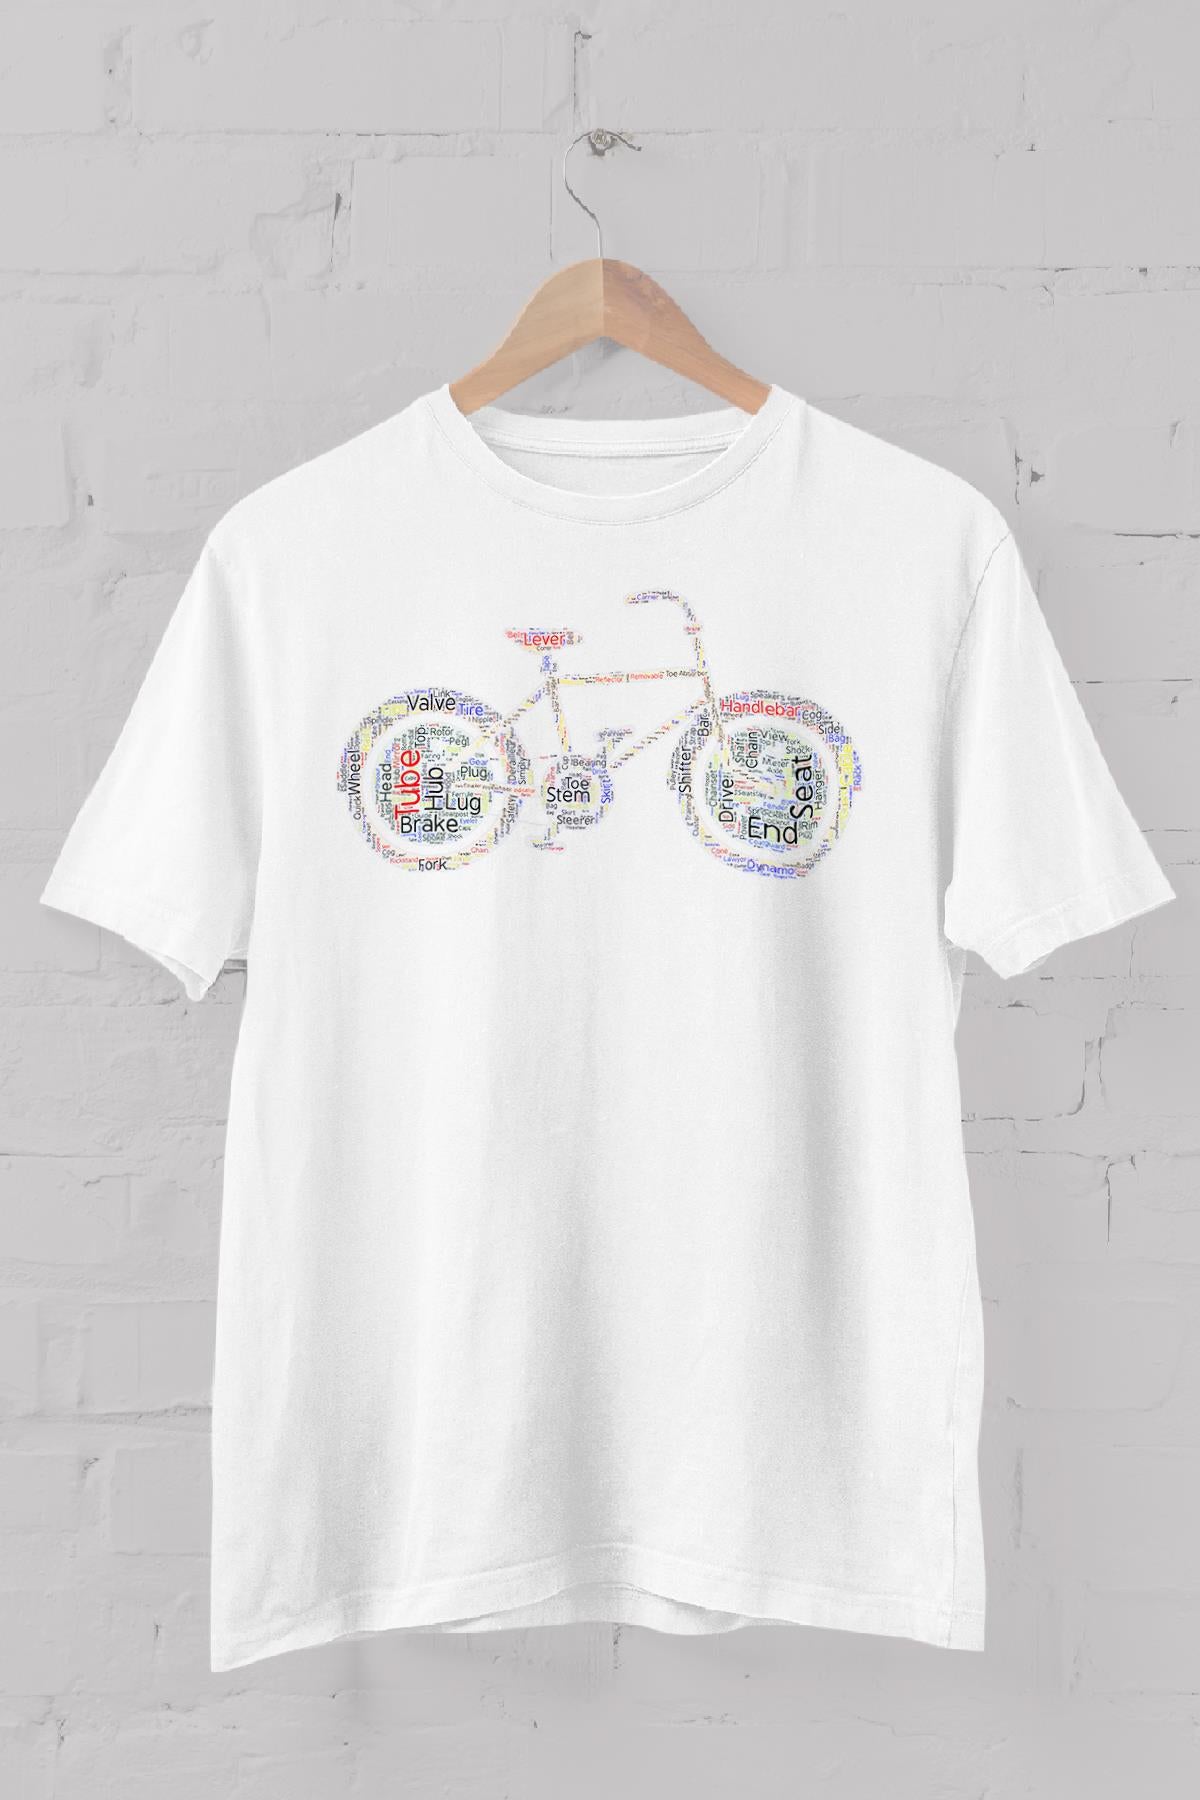 Bicycle tpigraphy printed Crew Neck men's t -shirt